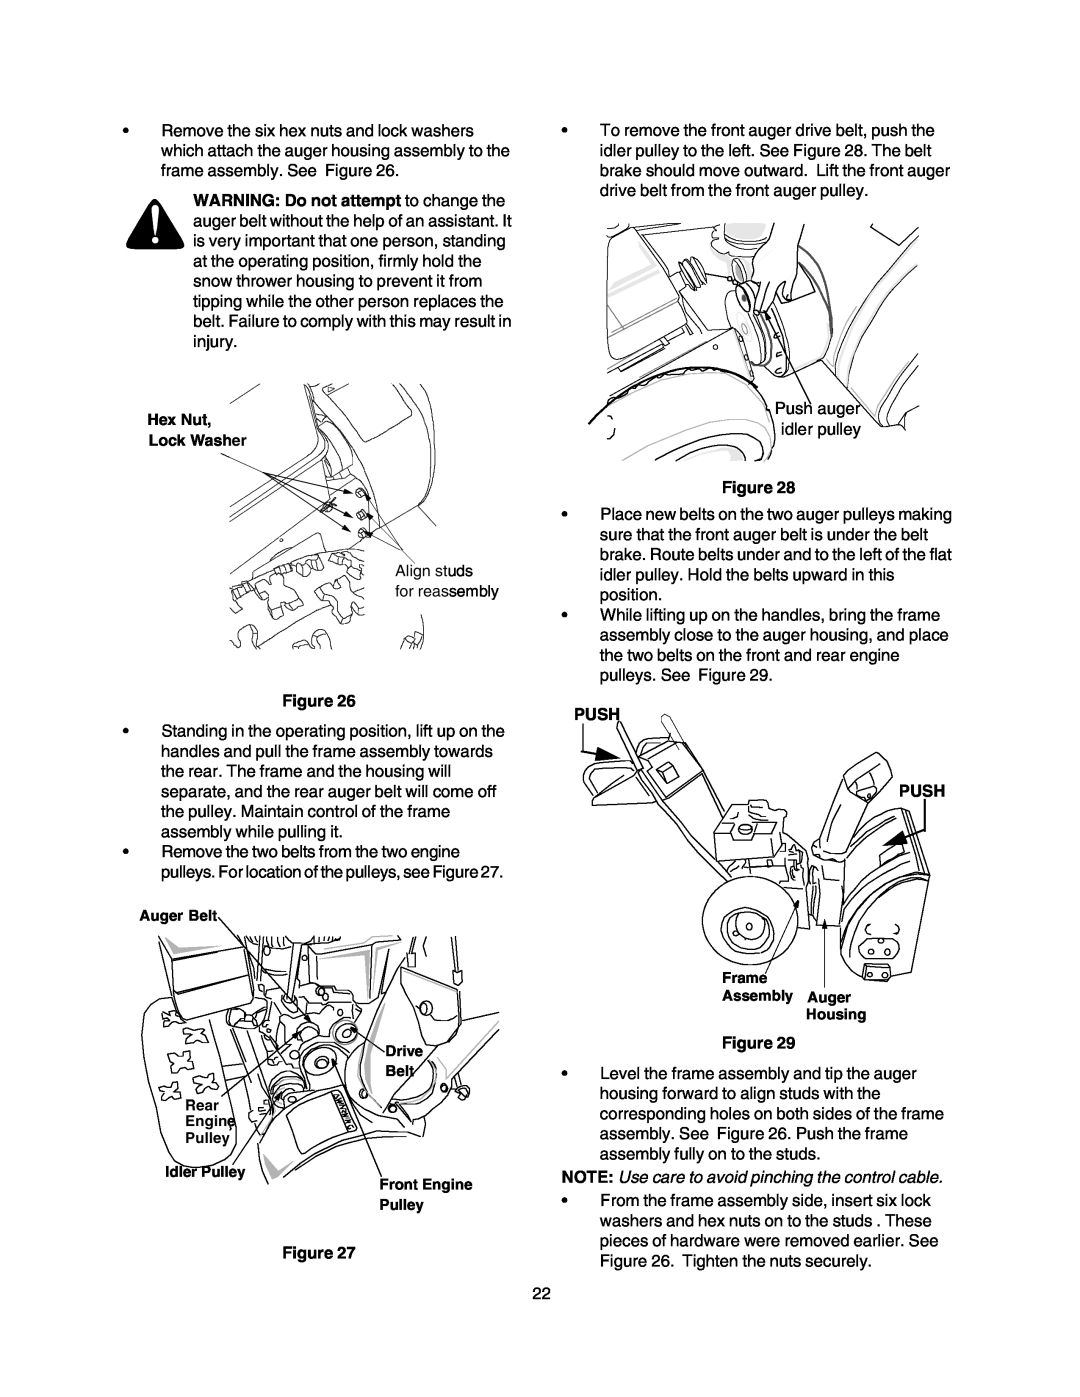 Craftsman 247.88853 WARNING Do not attempt to change the, Push Push, NOTE Use care to avoid pinching the control cable 